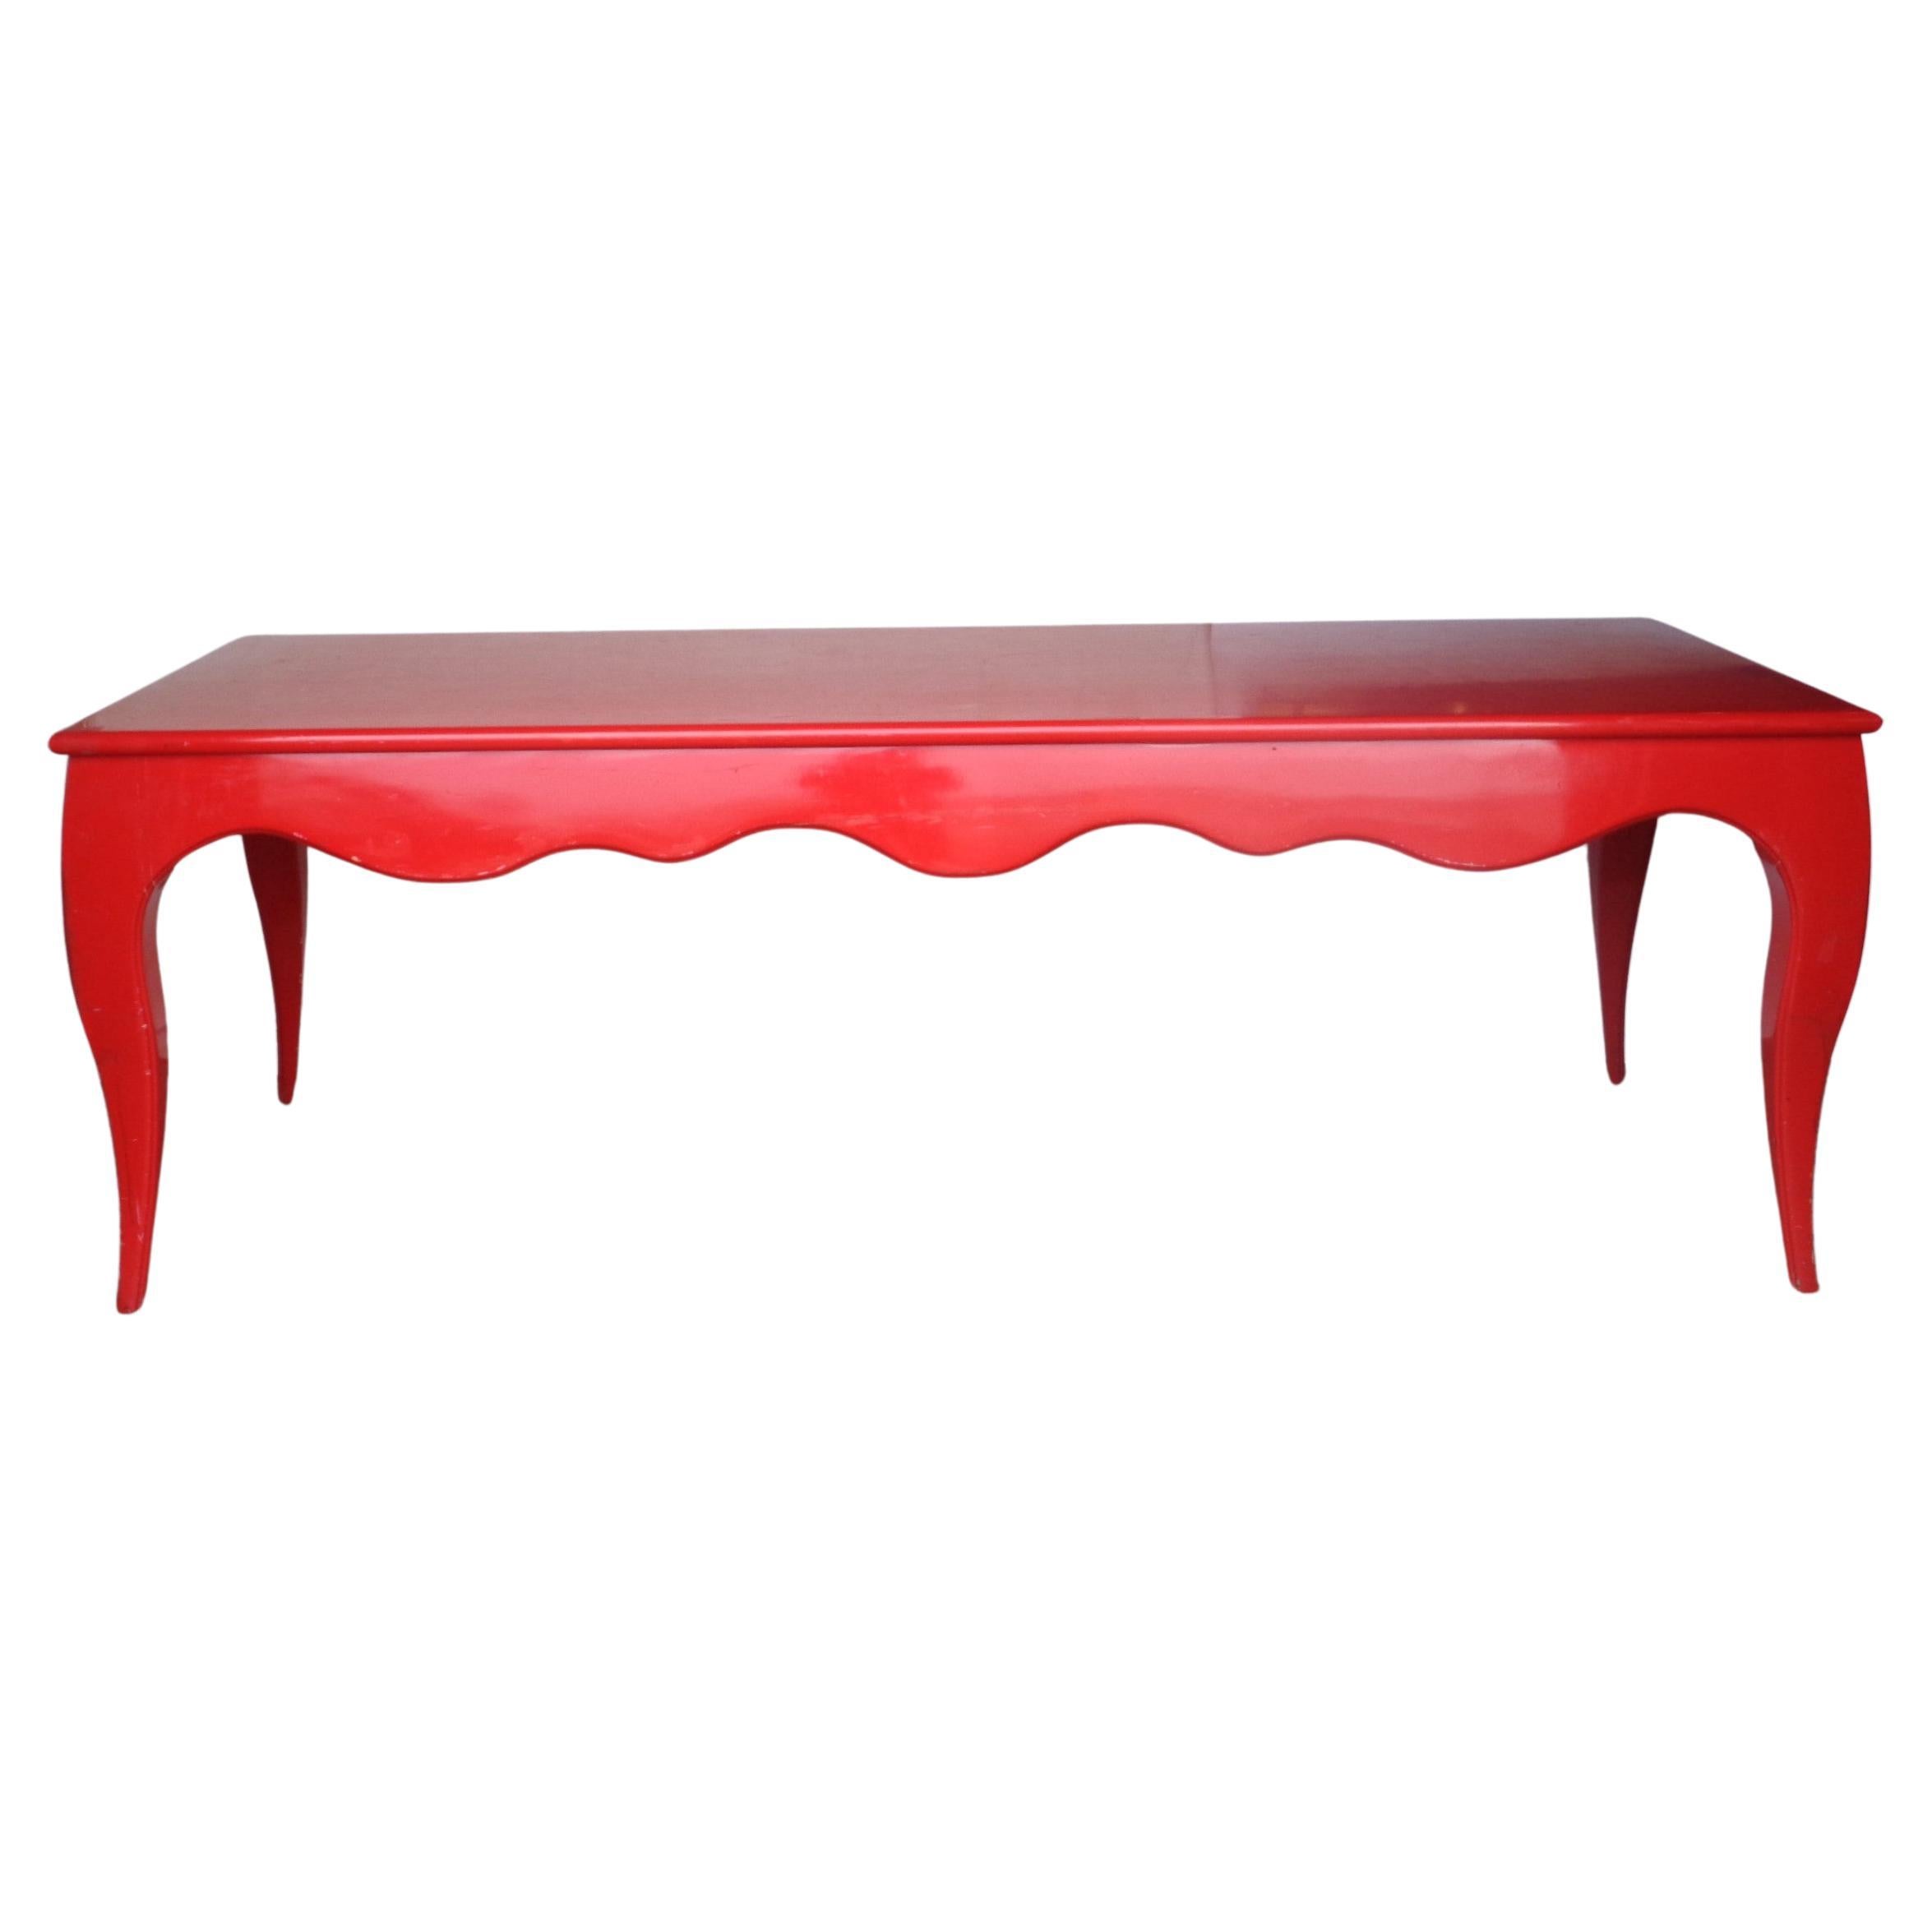 Large Red Lacquered Scallop Design Table style of Jean-Michel Frank, Circa 1970 For Sale